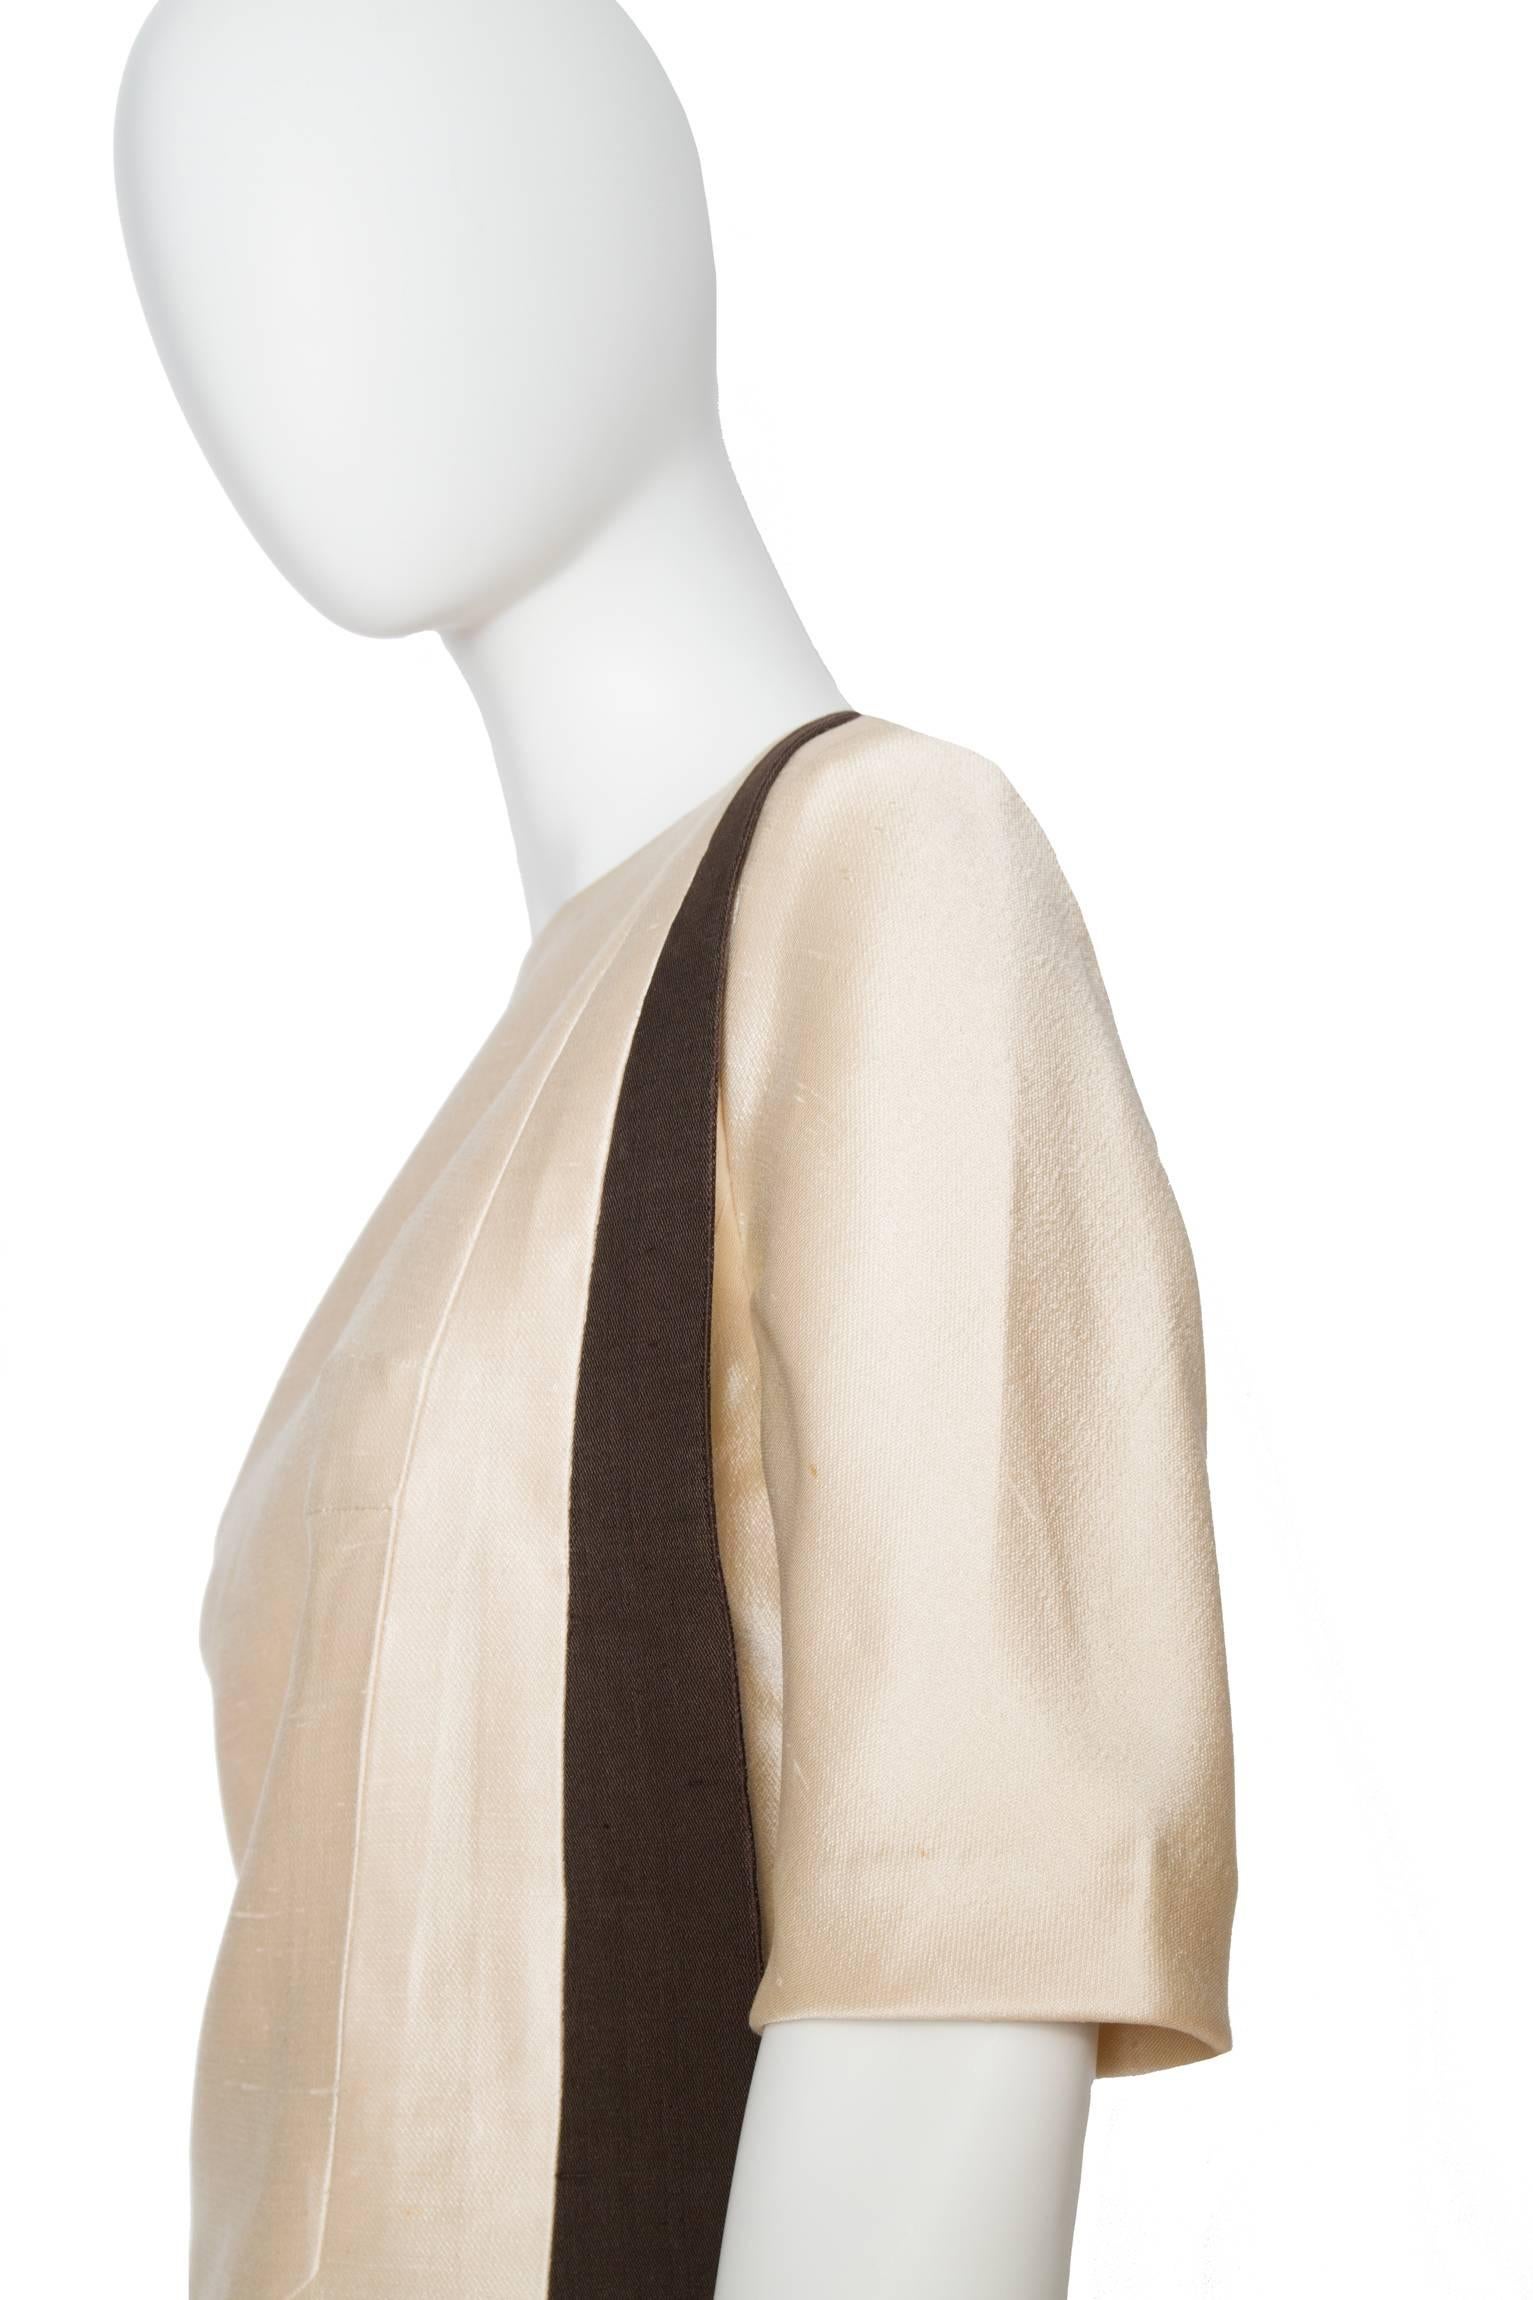 A 1960s Carven Two-Toned Silk Dress In Good Condition For Sale In Copenhagen, DK